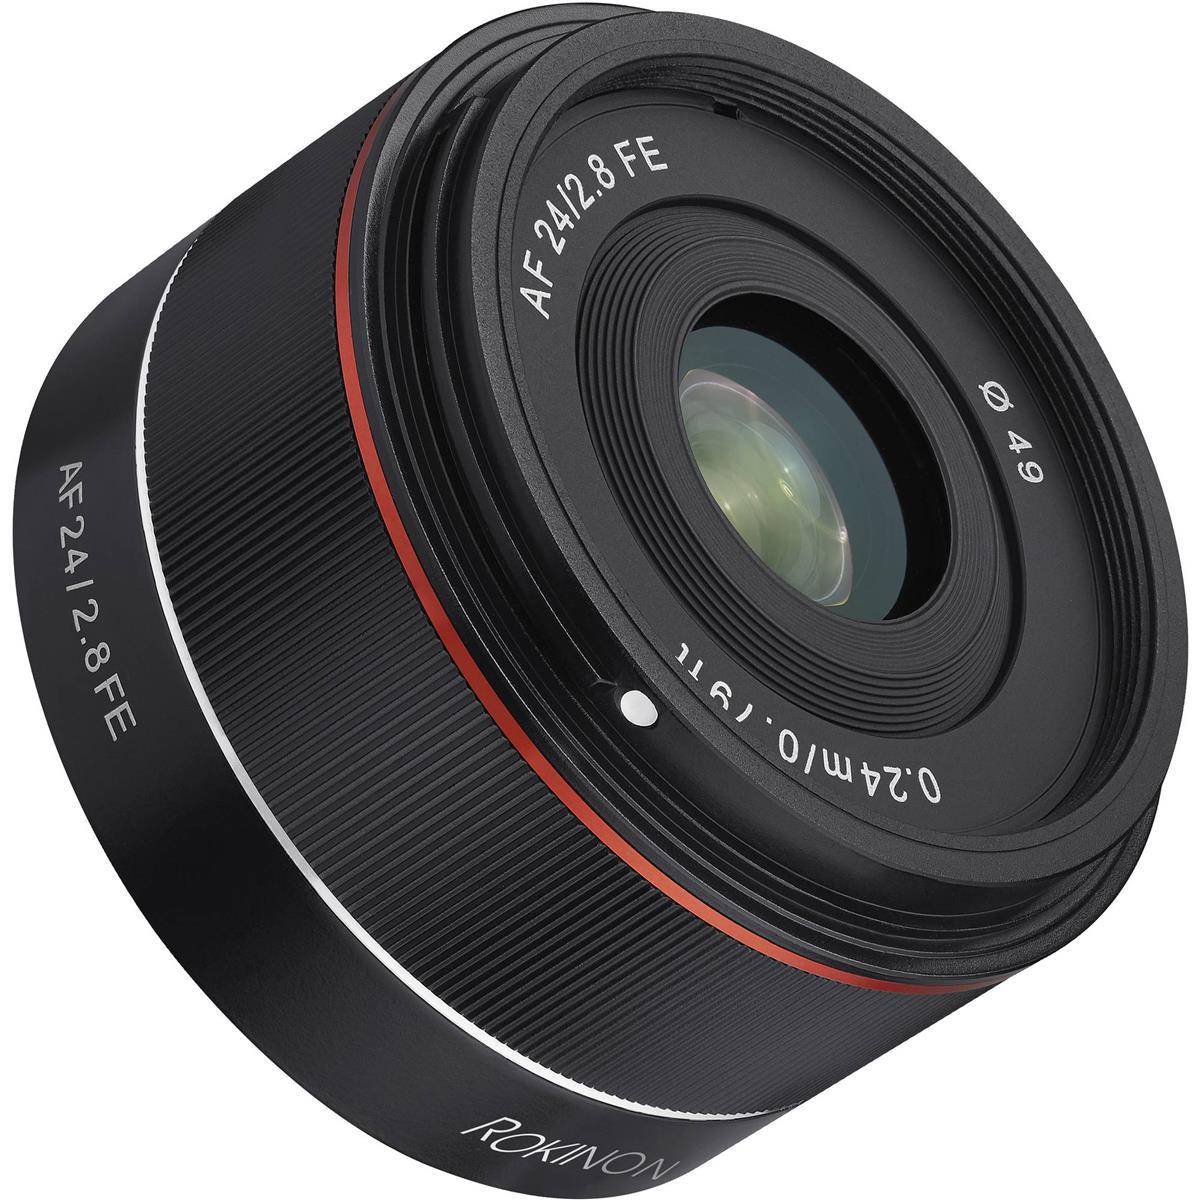 Rokinon AF 24mm f/2.8 FE Lens for Sony E for $189 Shipped